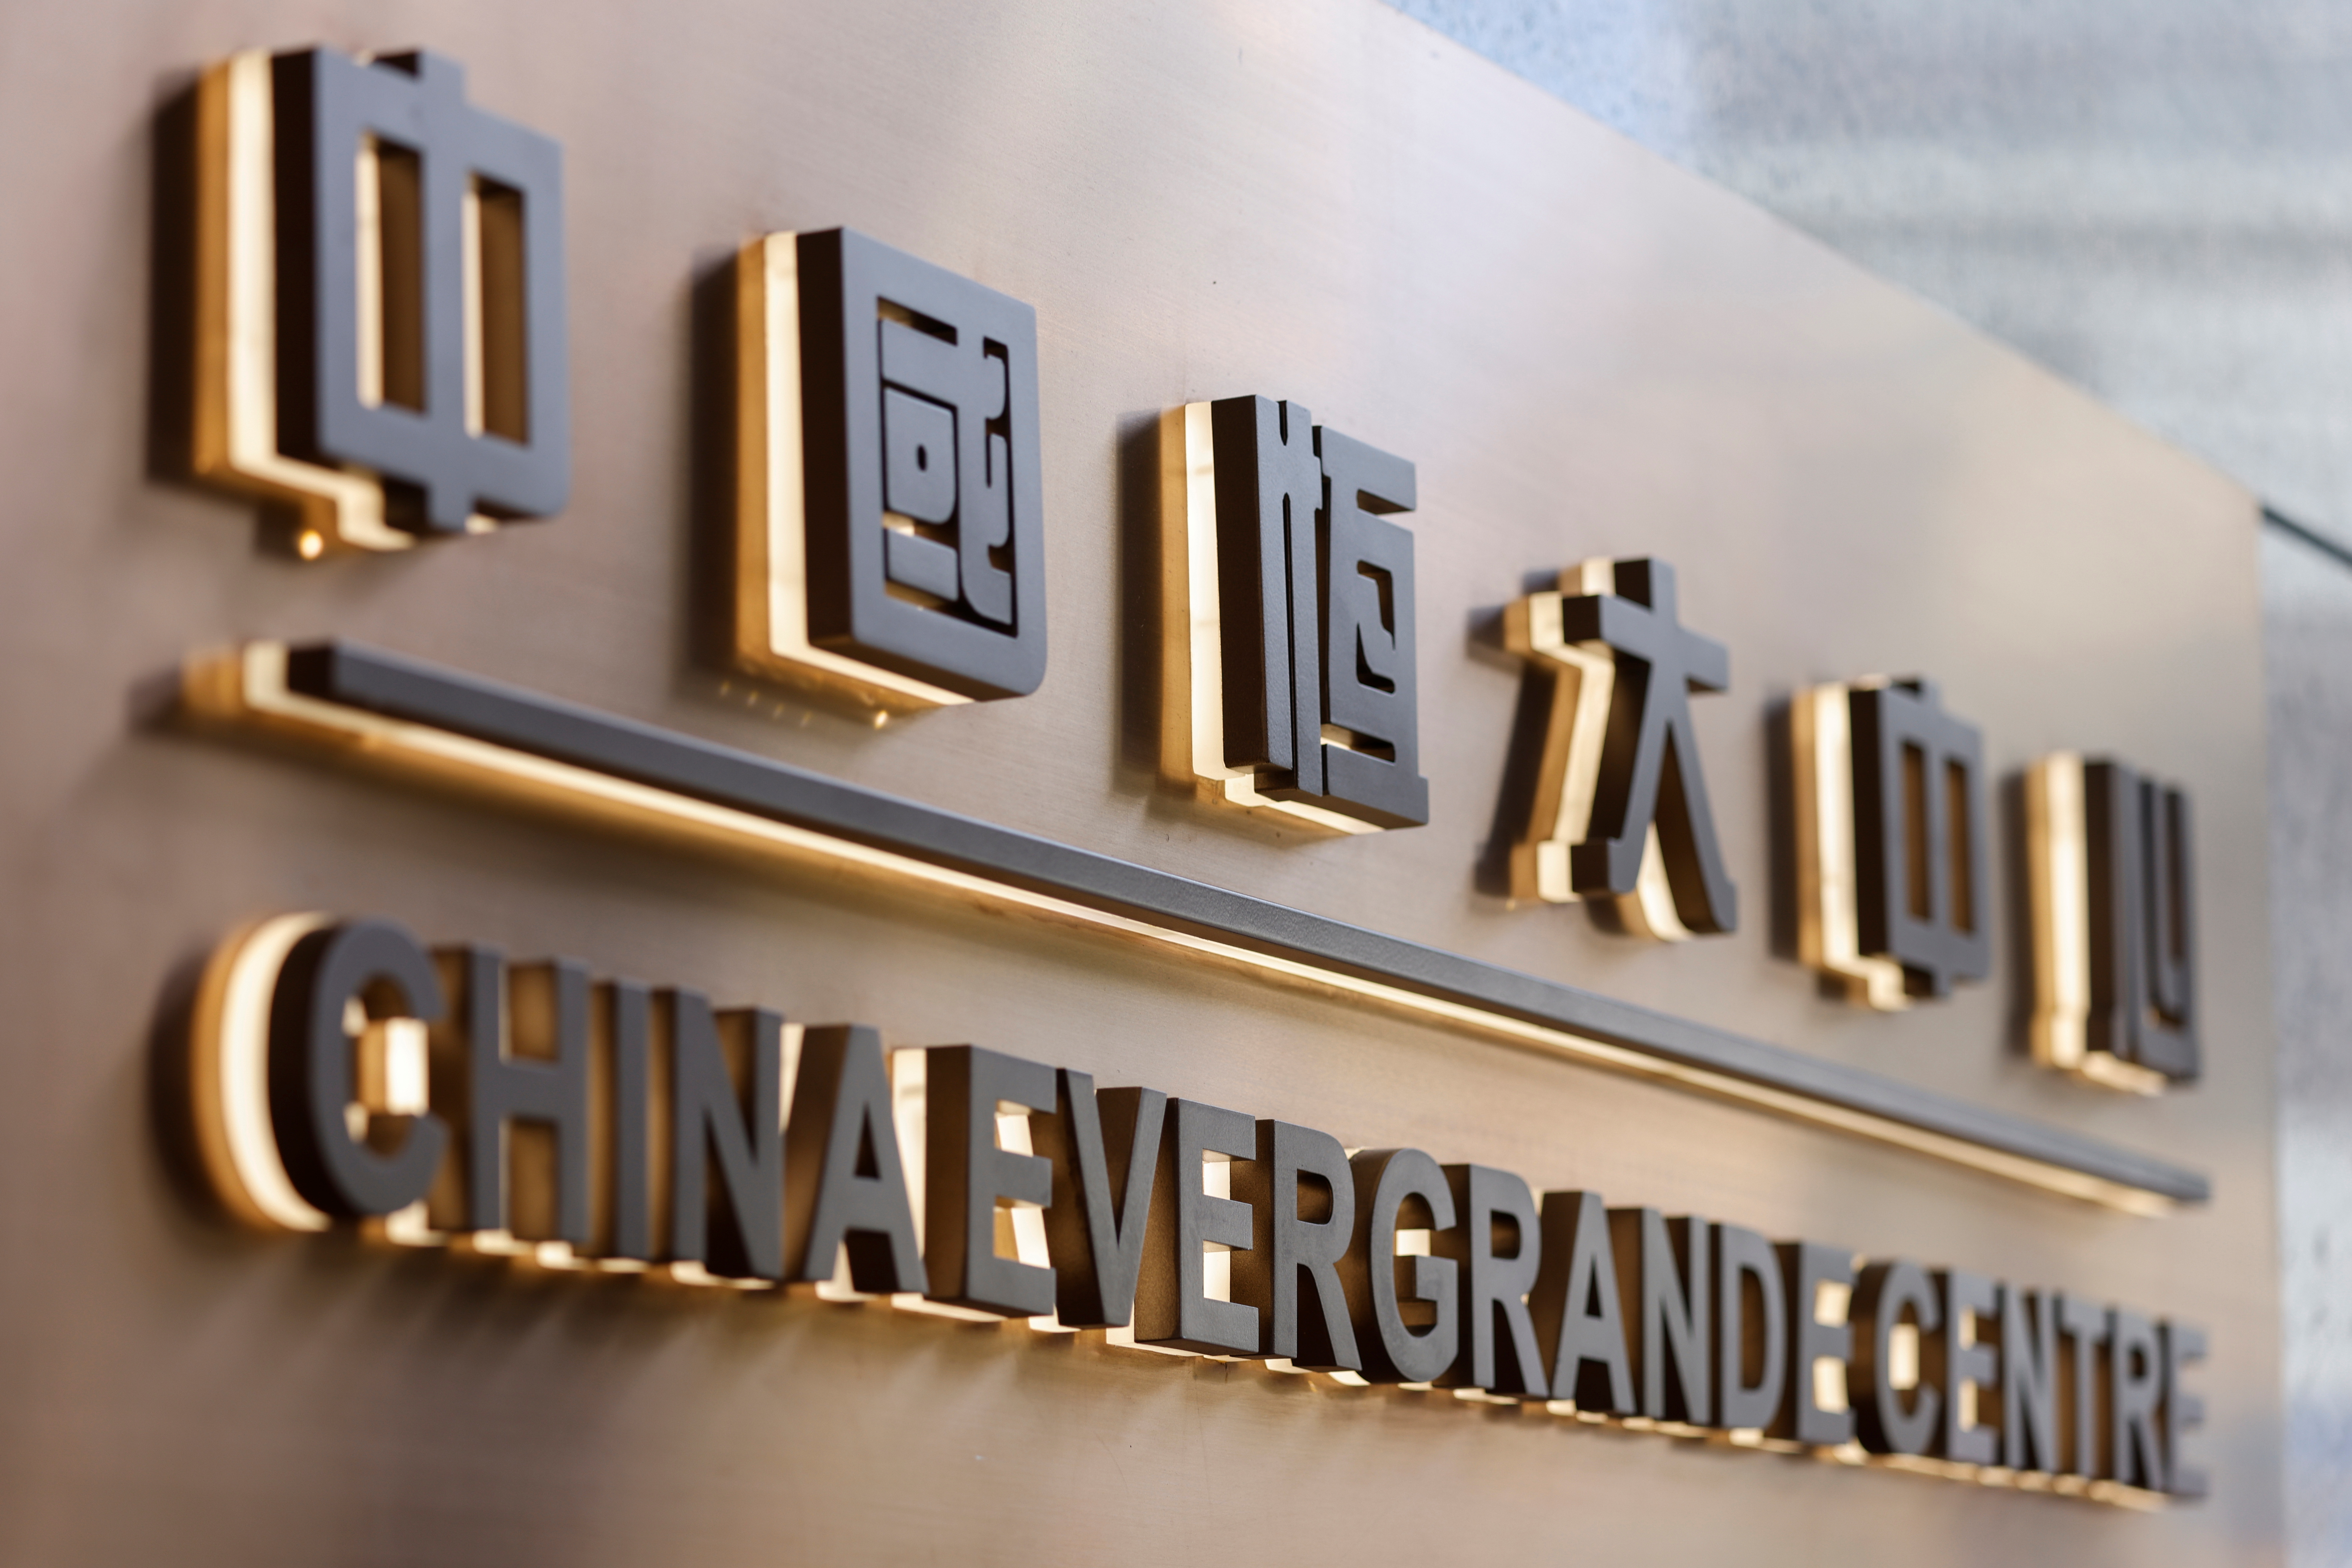 The China Evergrande Centre building sign is seen in Hong Kong, China December 7, 2021. REUTERS/Tyrone Siu